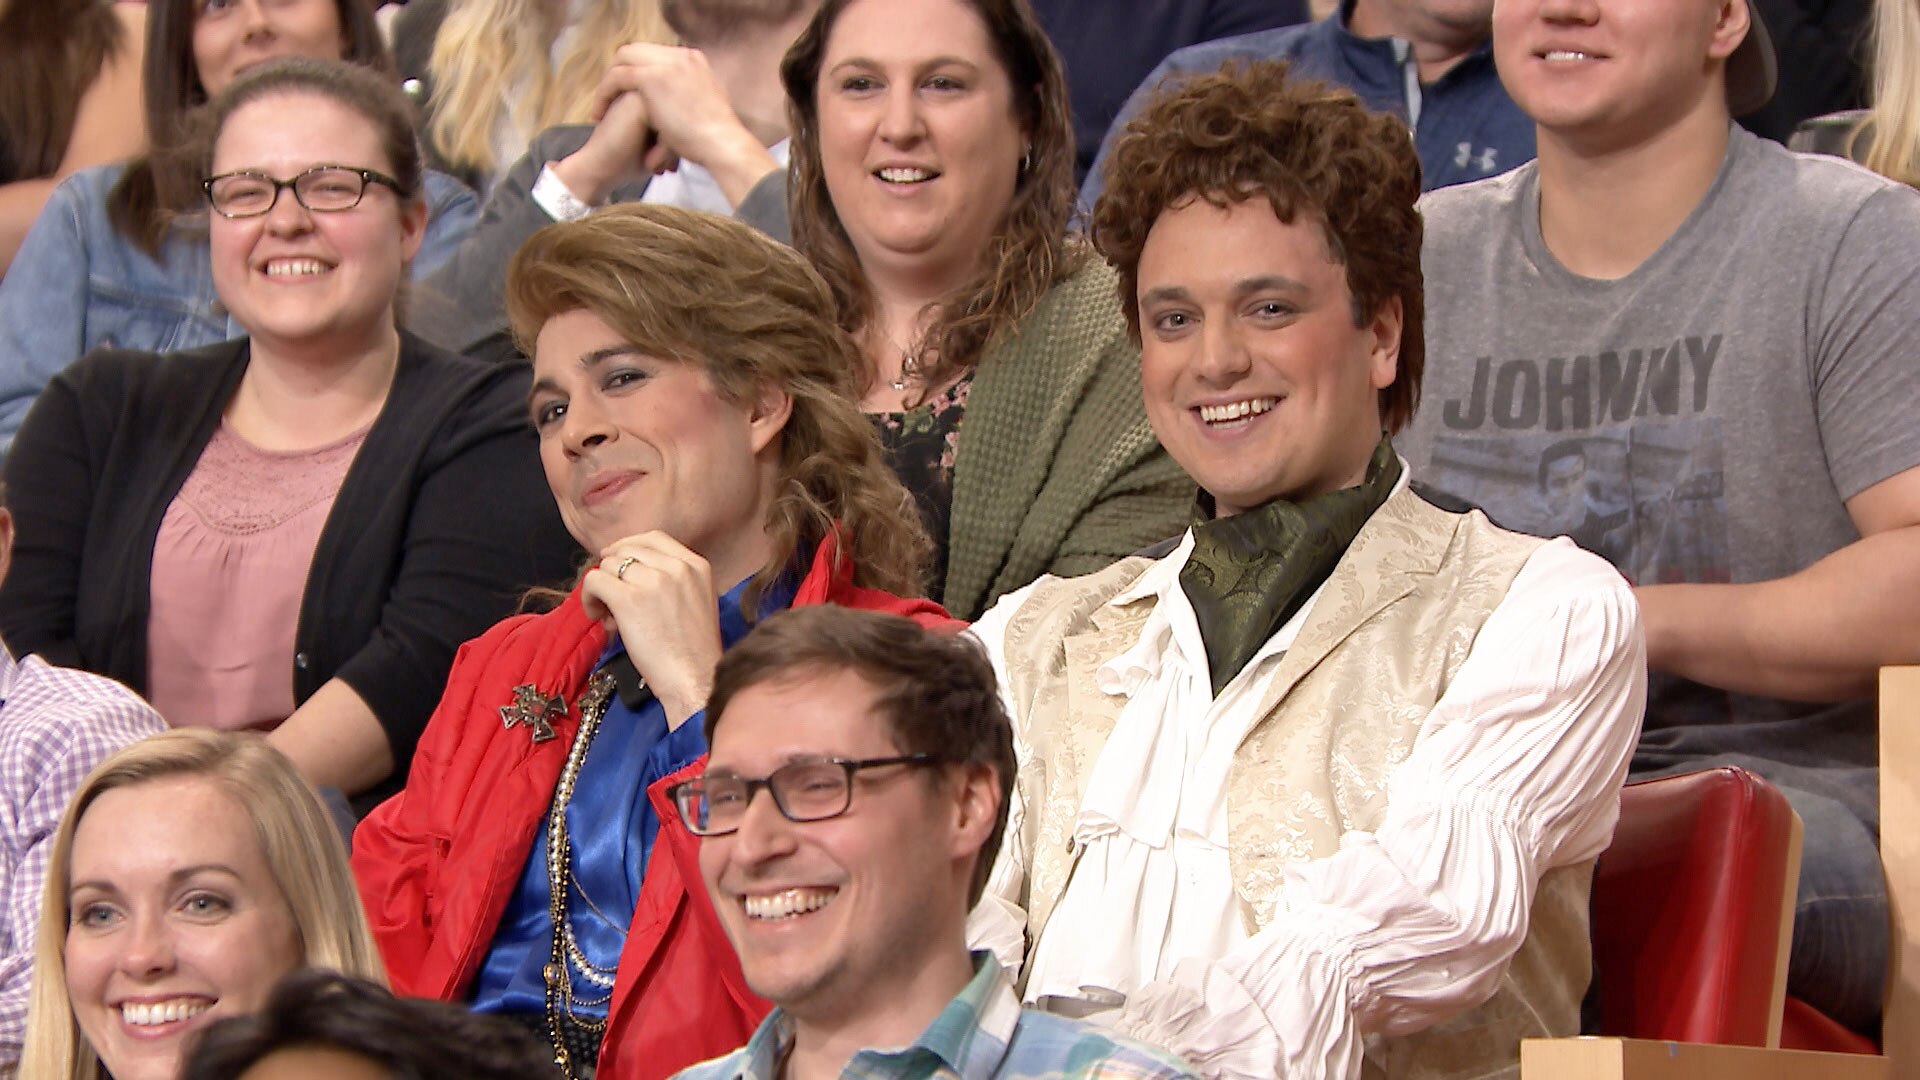 Watch The Tonight Show Starring Jimmy Fallon Highlight: Audience